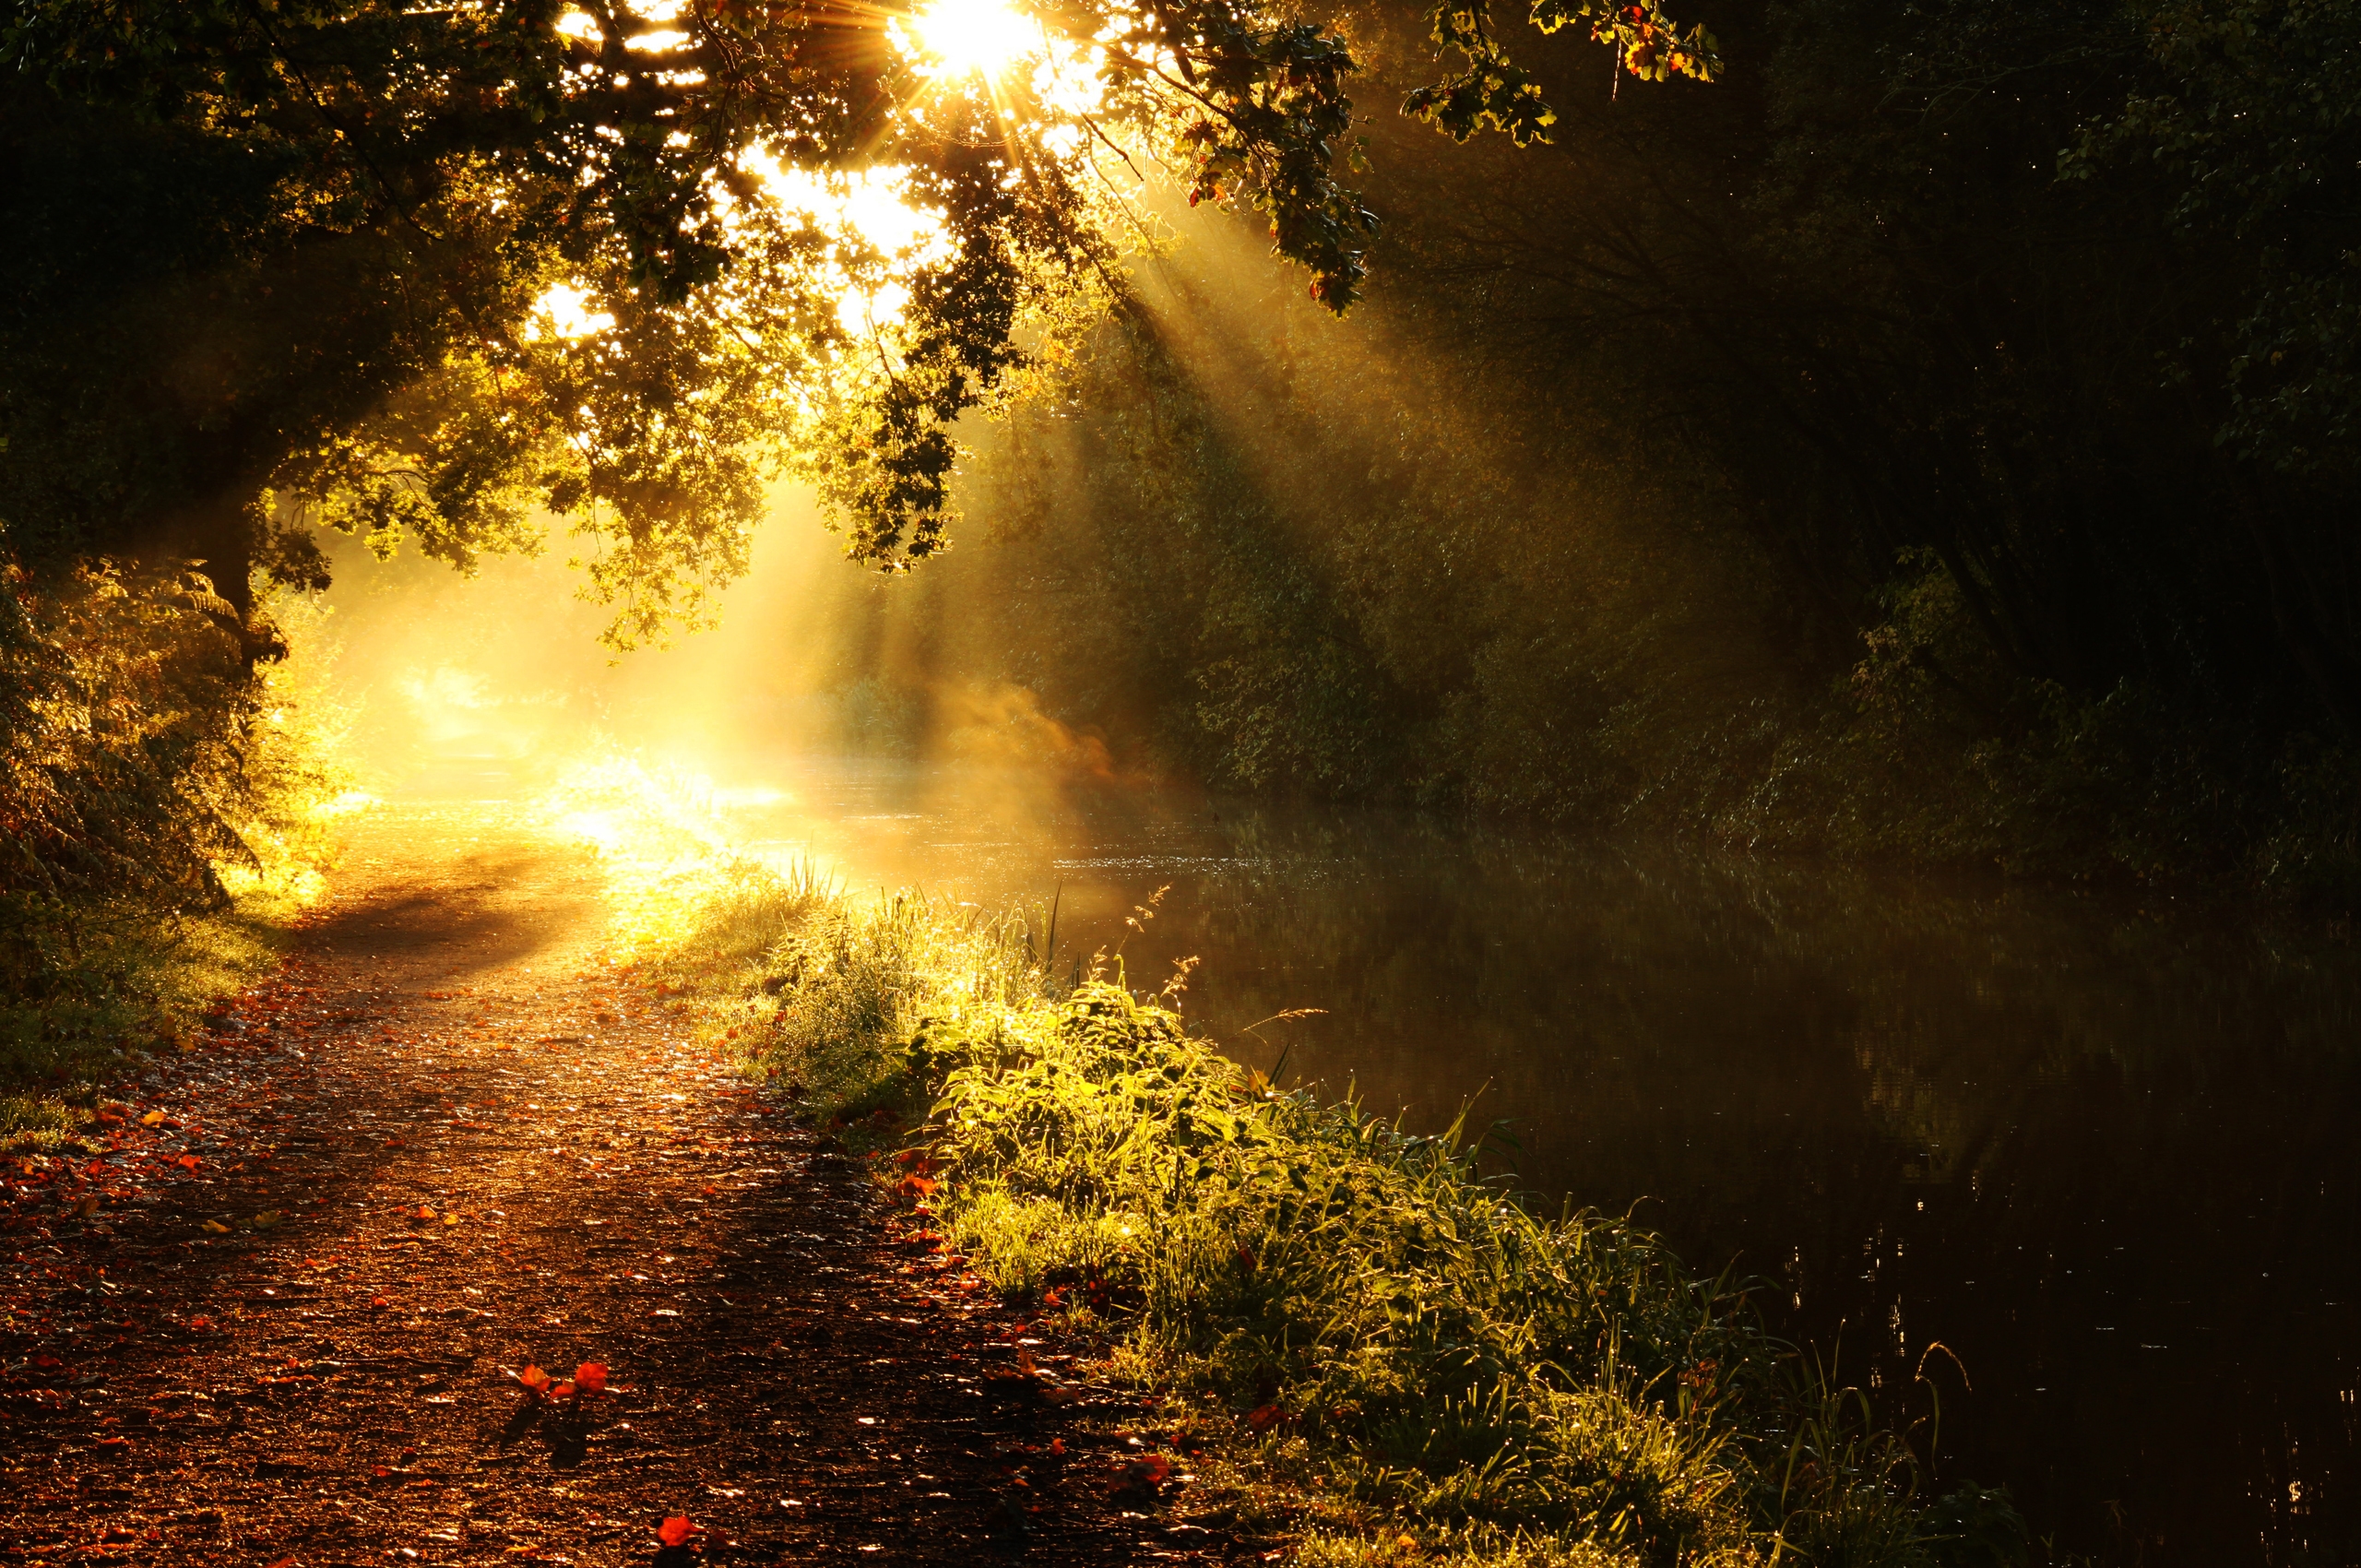 light, nature, rivers, sun, shine, wood, beams, rays, tree, branches, branch, morning, glow